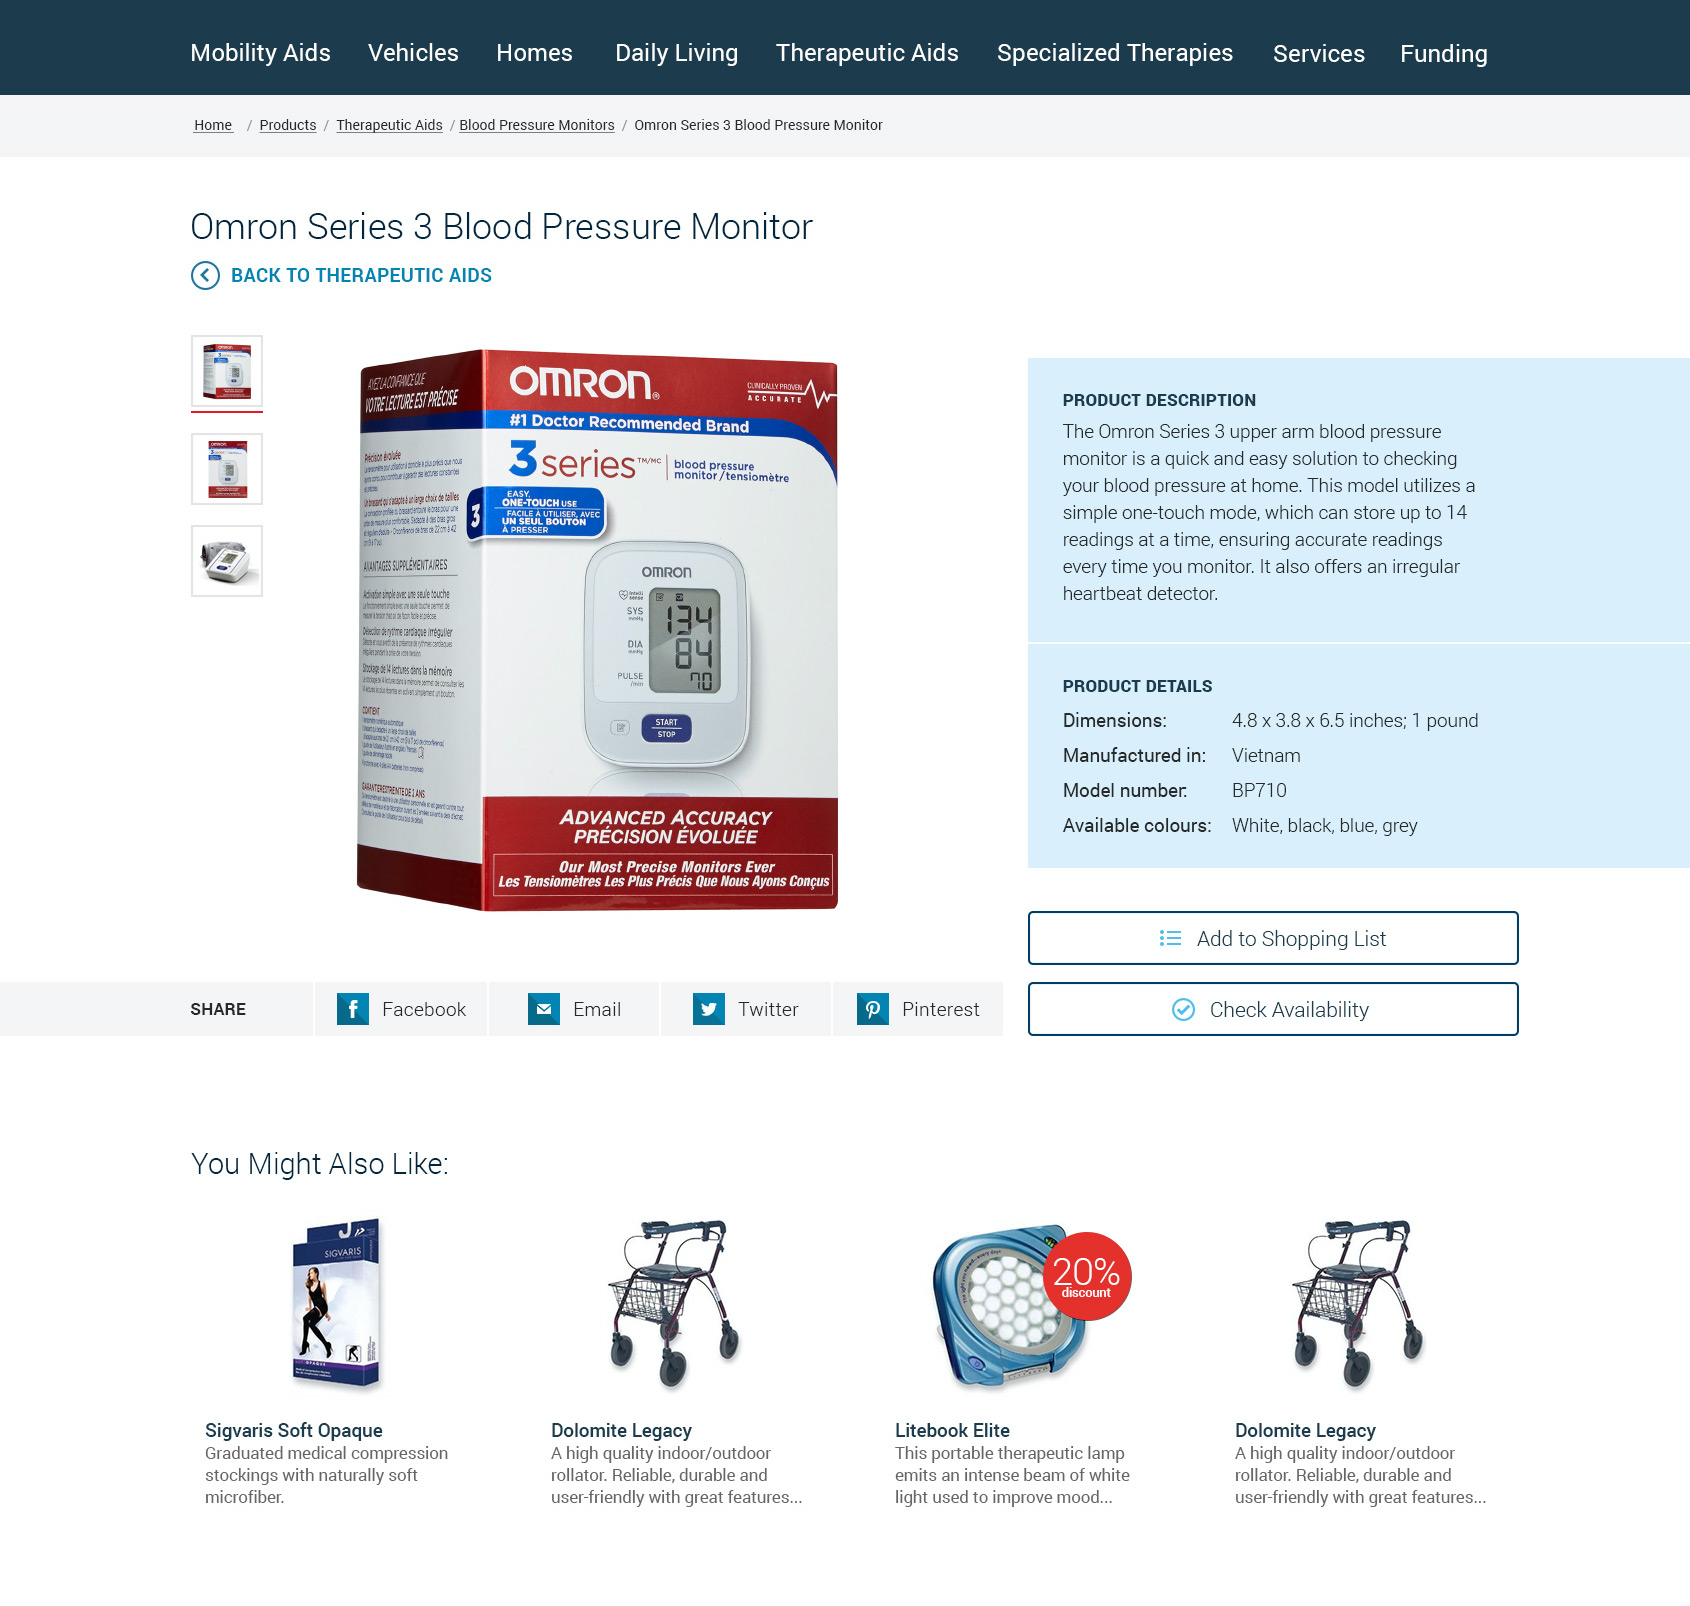 Photoshop mockup showing a product page for a blood pressure monitor.